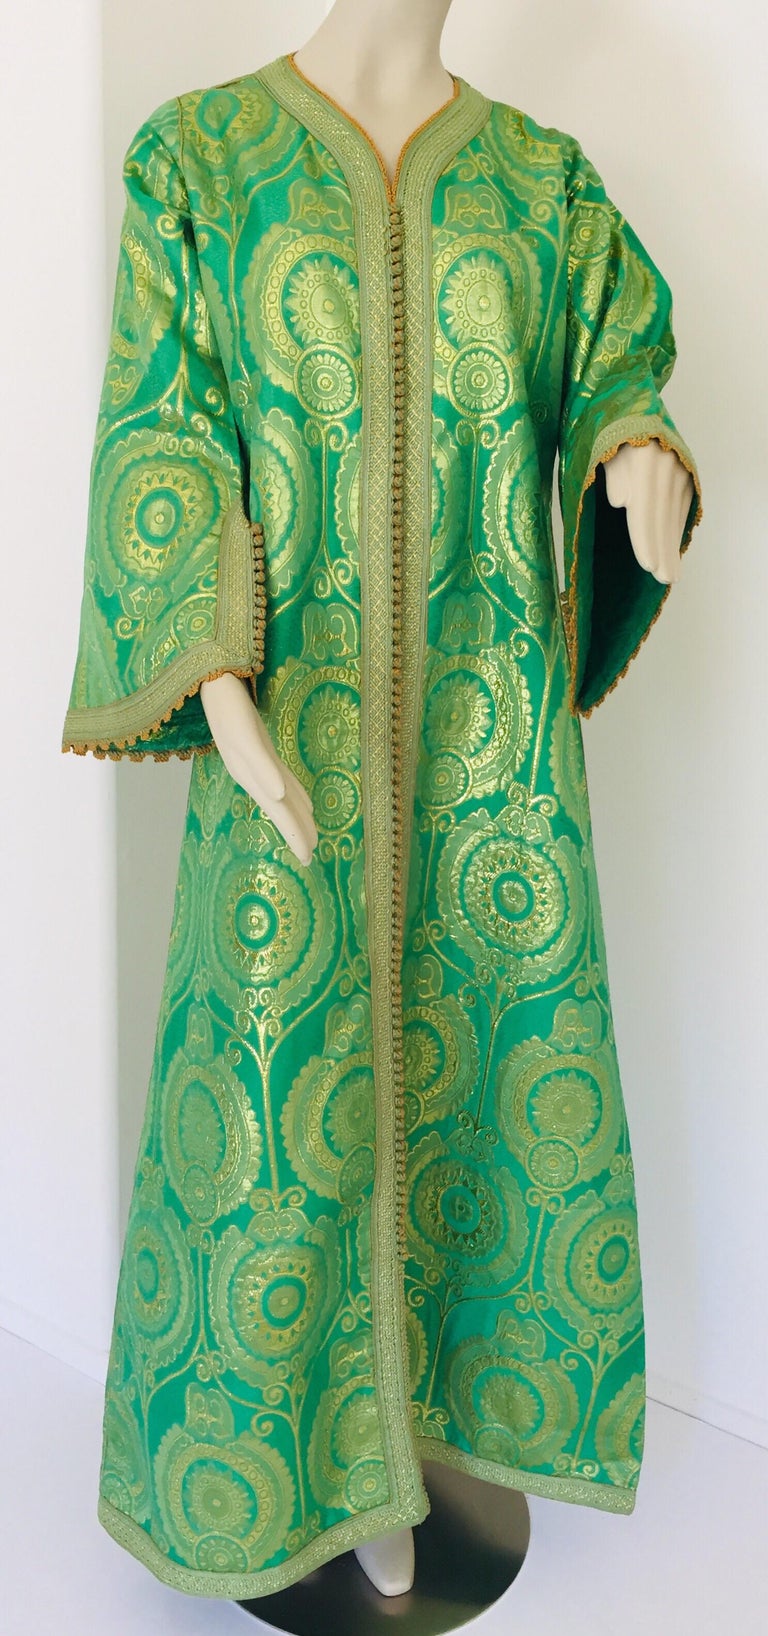 Elegant Moroccan Caftan Lime Green and Gold Metallic Floral Brocade In Good Condition For Sale In North Hollywood, CA